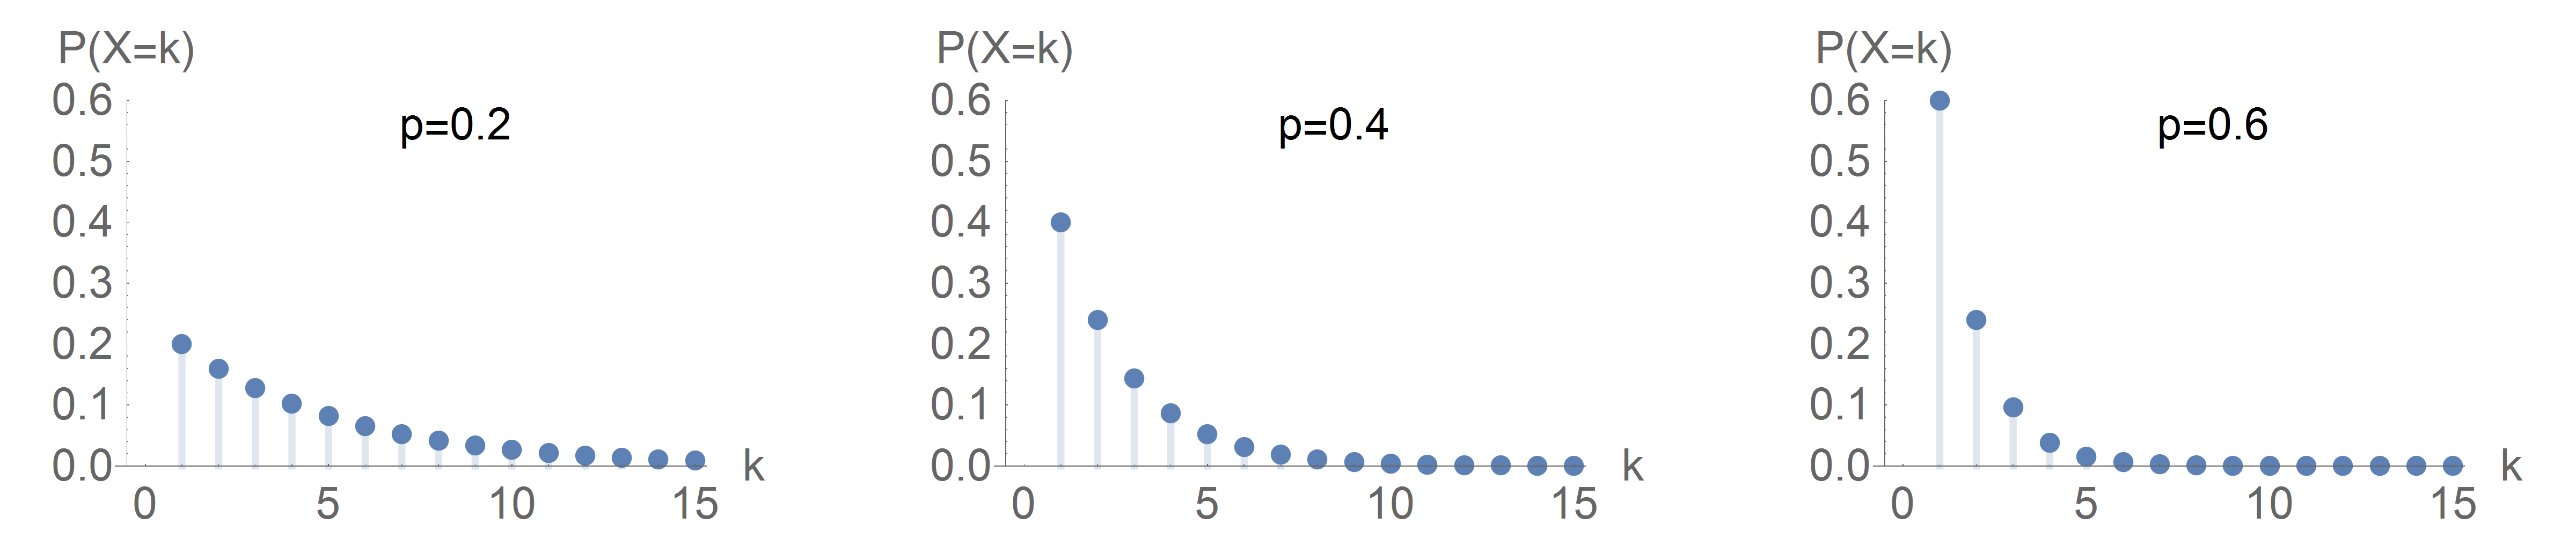 Probability mass functions for the shifted geometric distribution given various probabilities of success.